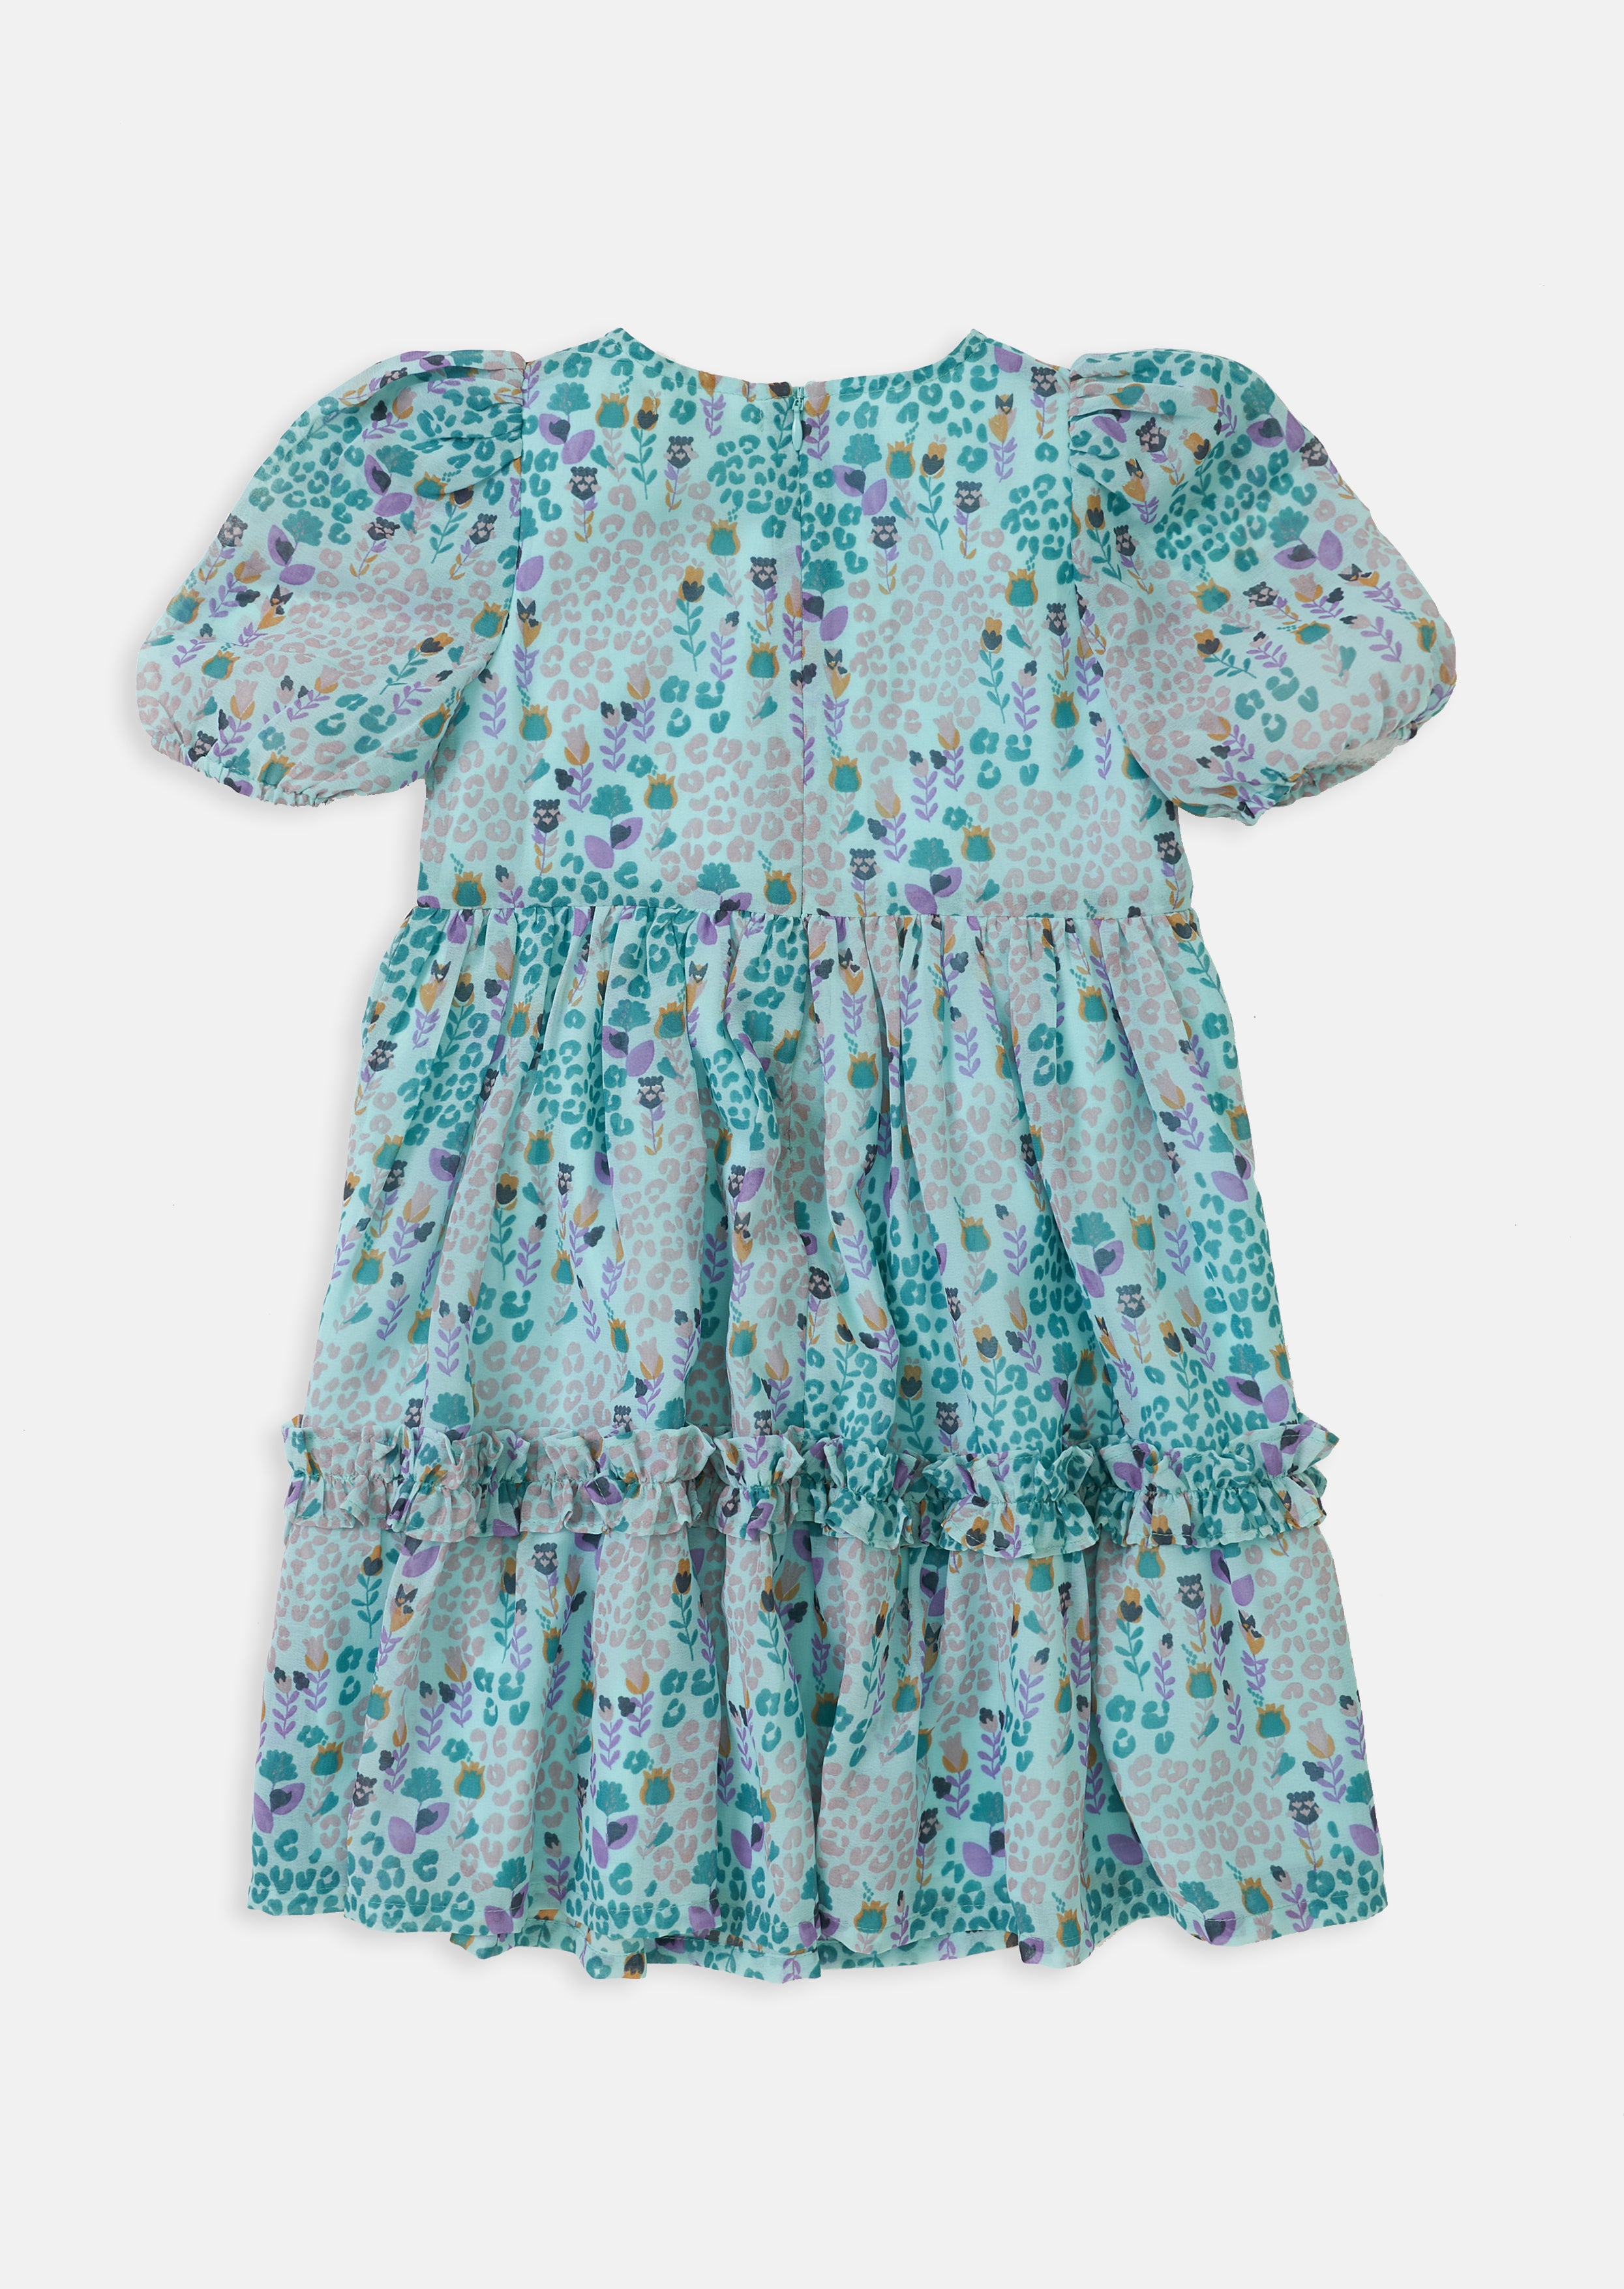 Girls Floral Printed Woven Blue Dress with Puff Sleeves